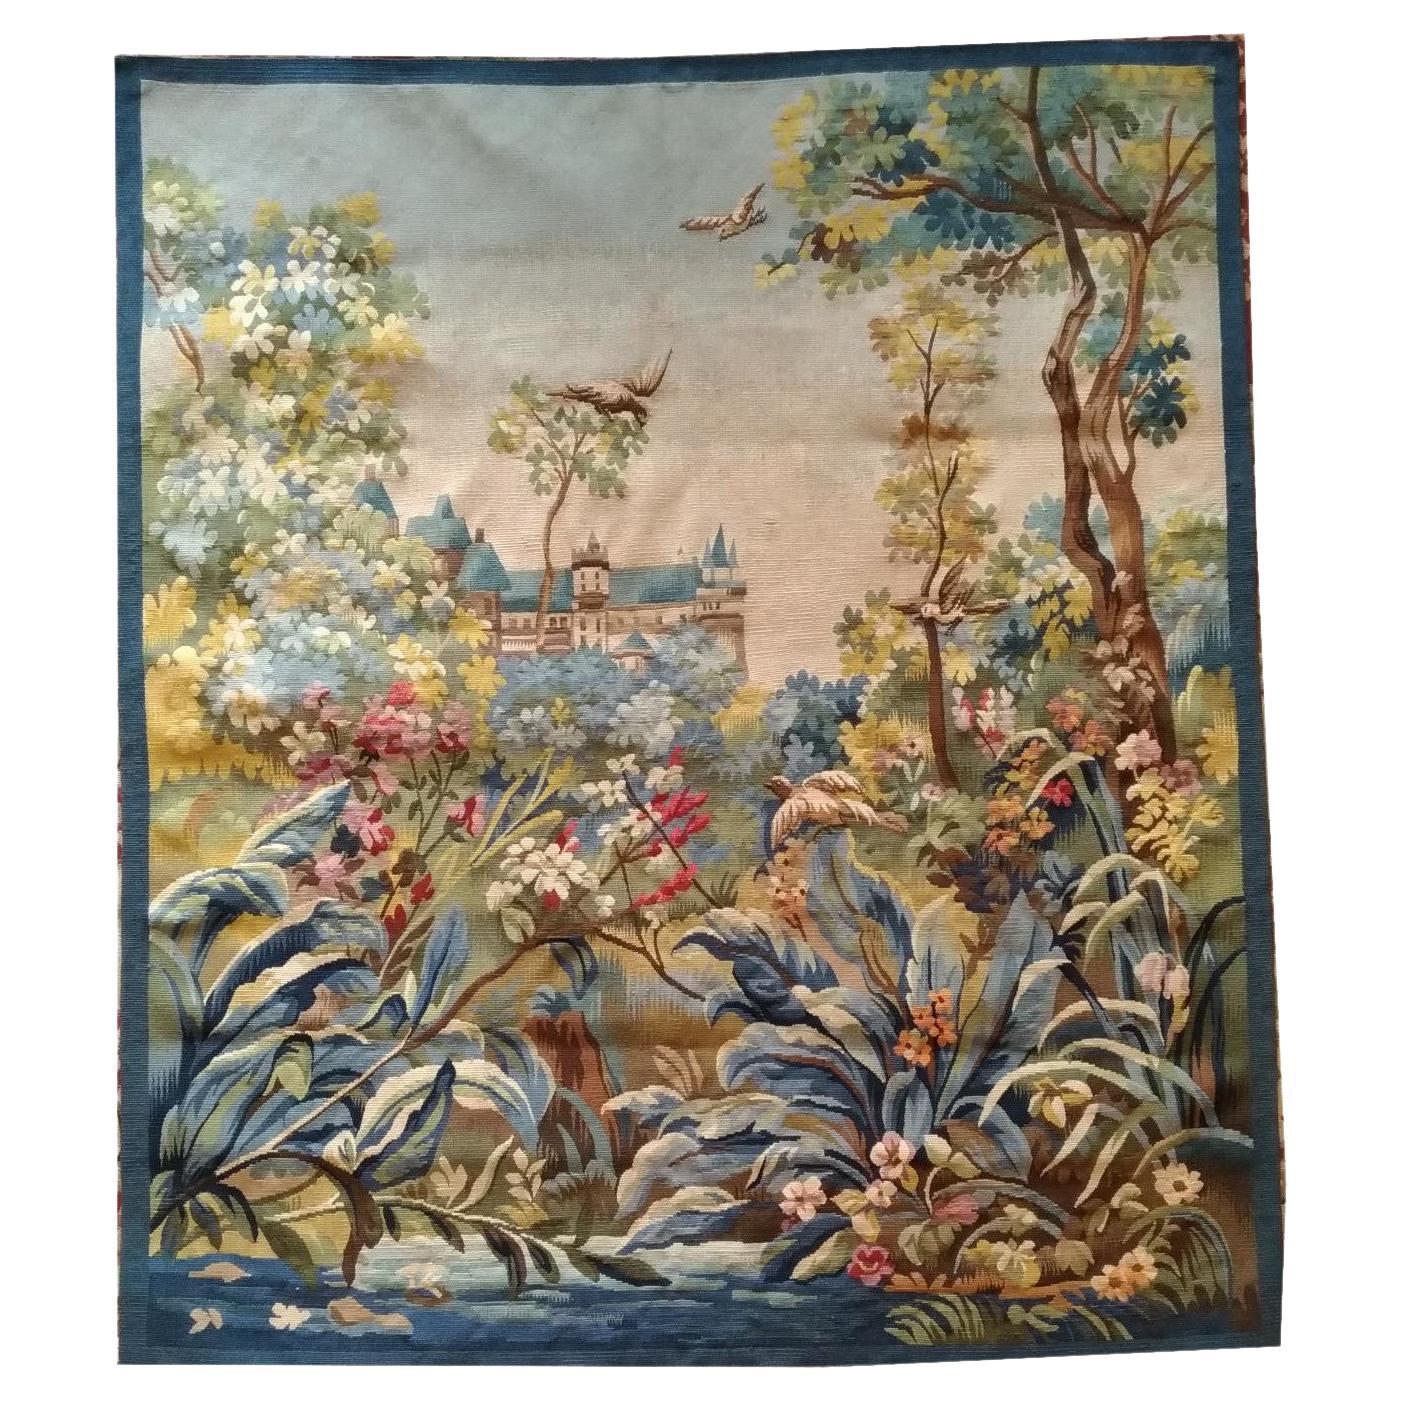 20th century aubusson tapestry bird and castle - n° 1144